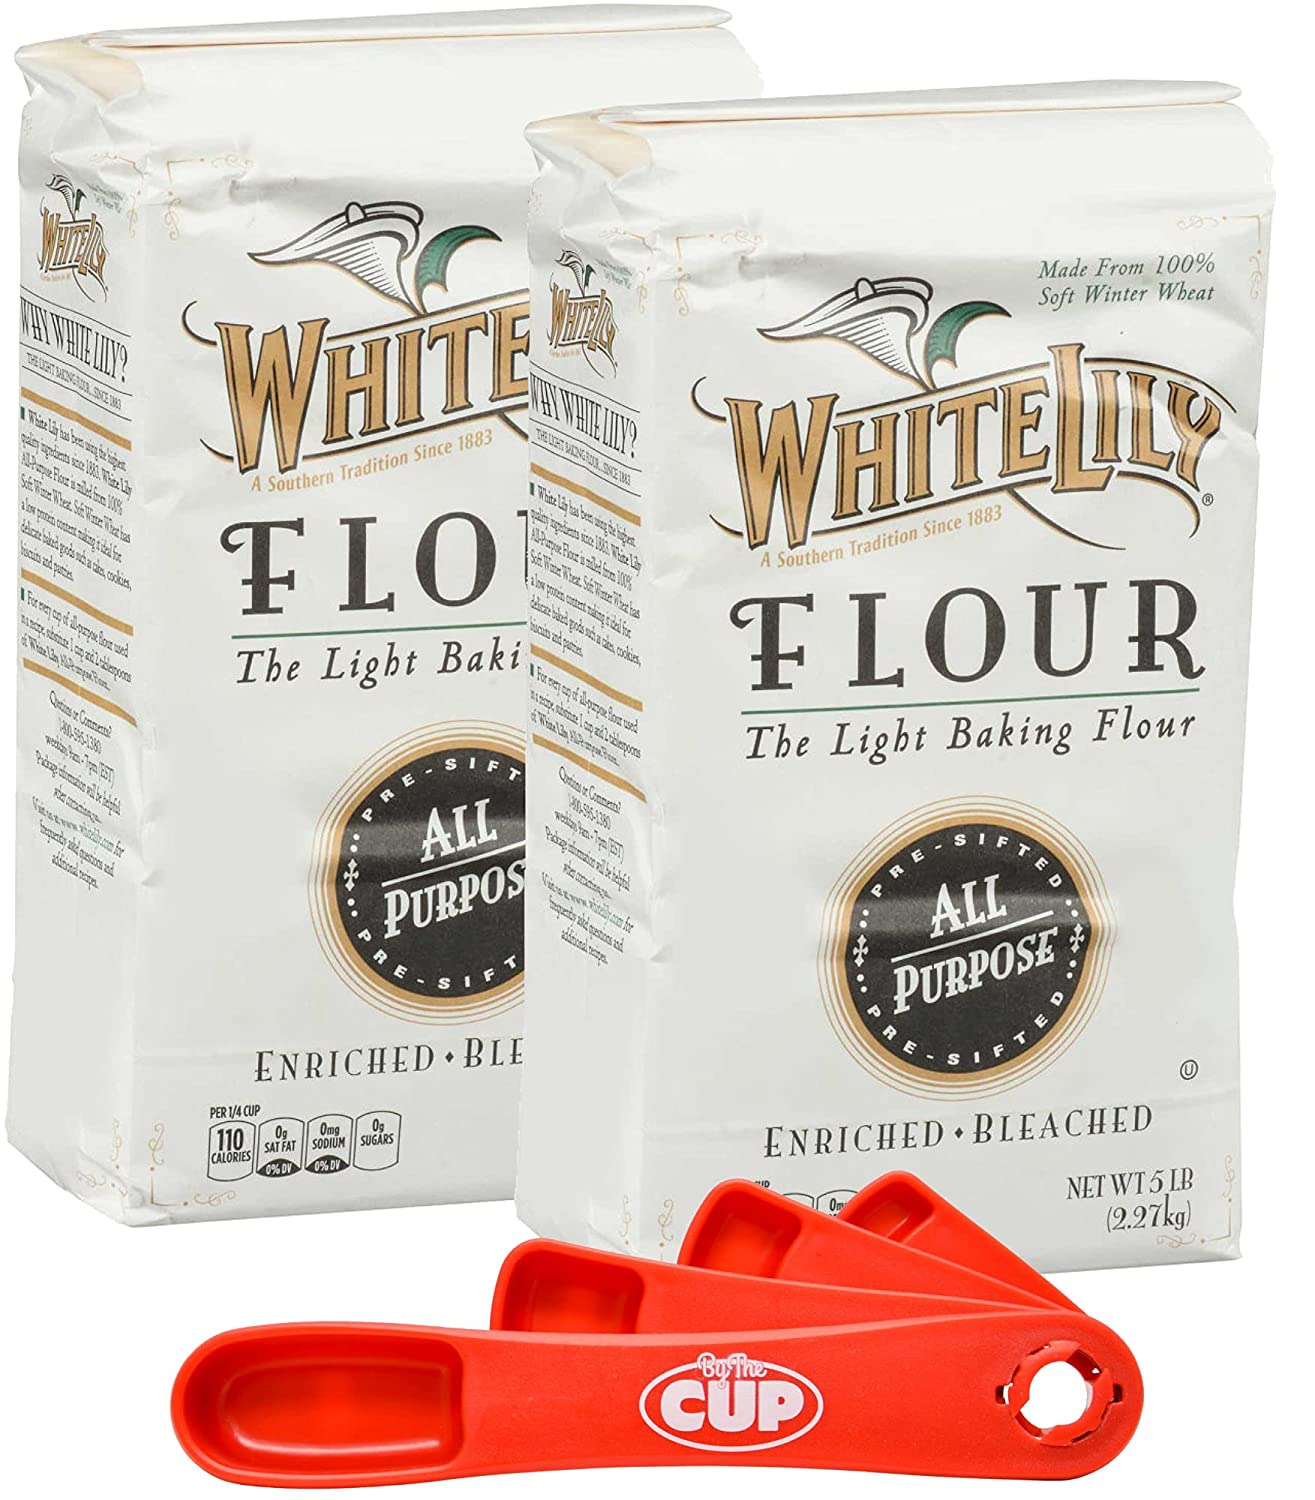 All Purpose Flour 5 Lb Bag (Pack of 2) by the Cup Swivel Spoons